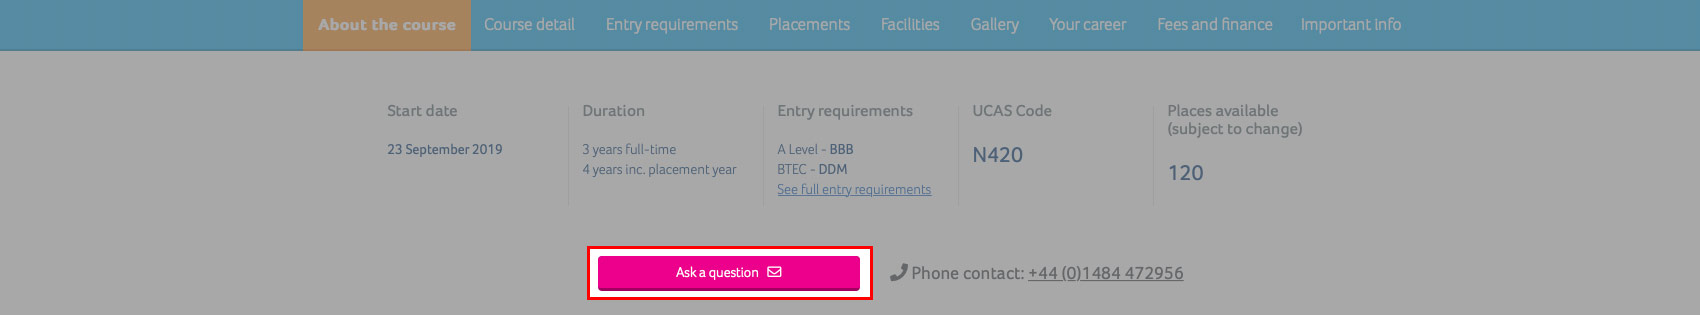 A screenshot of the course finder application with the Ask a question area highlighted.